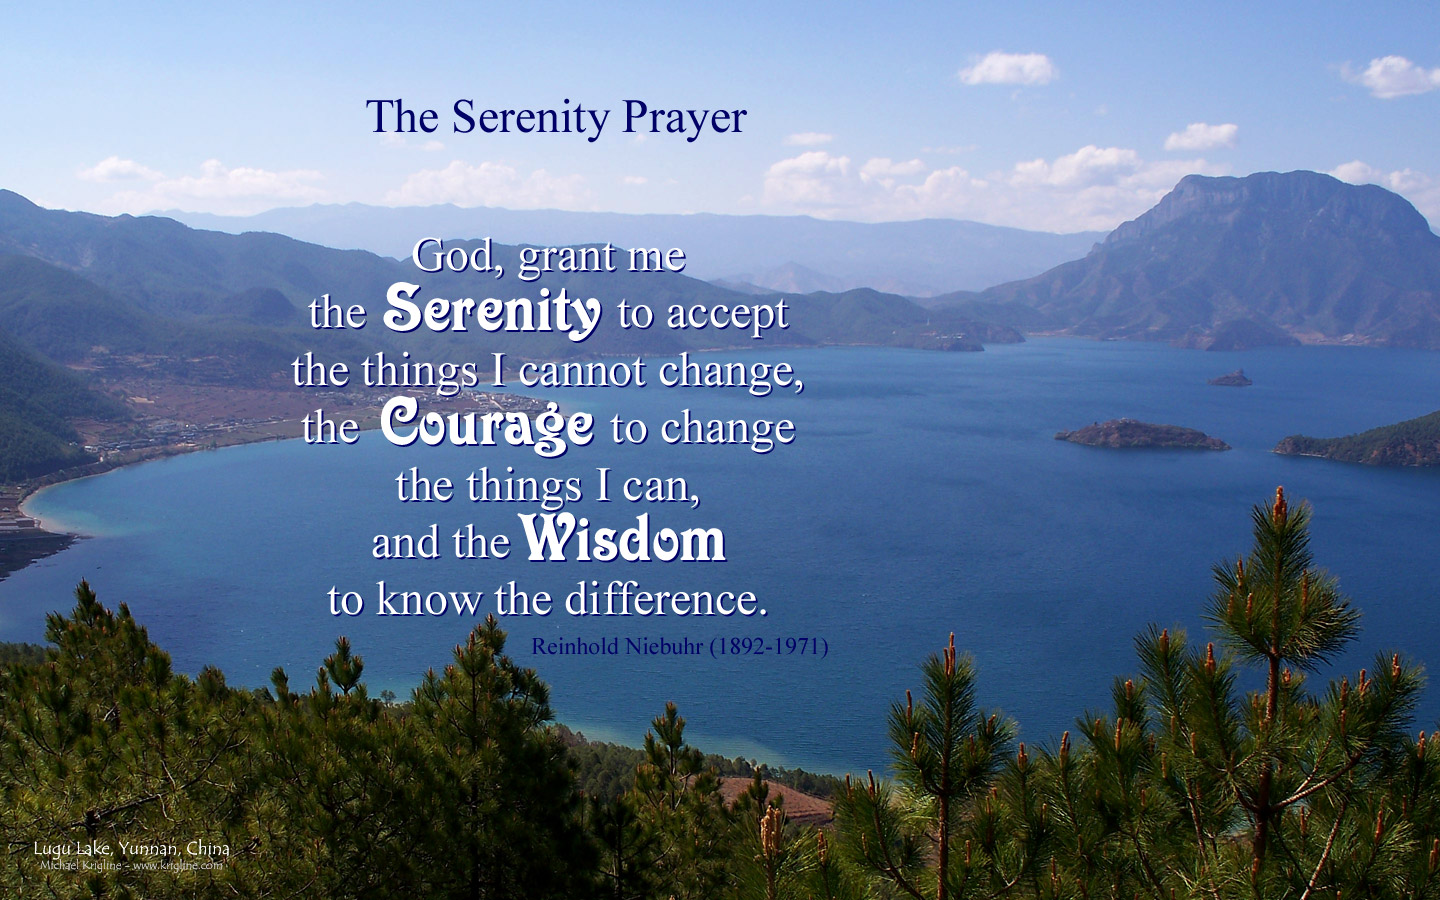 Pin Serenity Prayer Wallpaper Image Search Results On